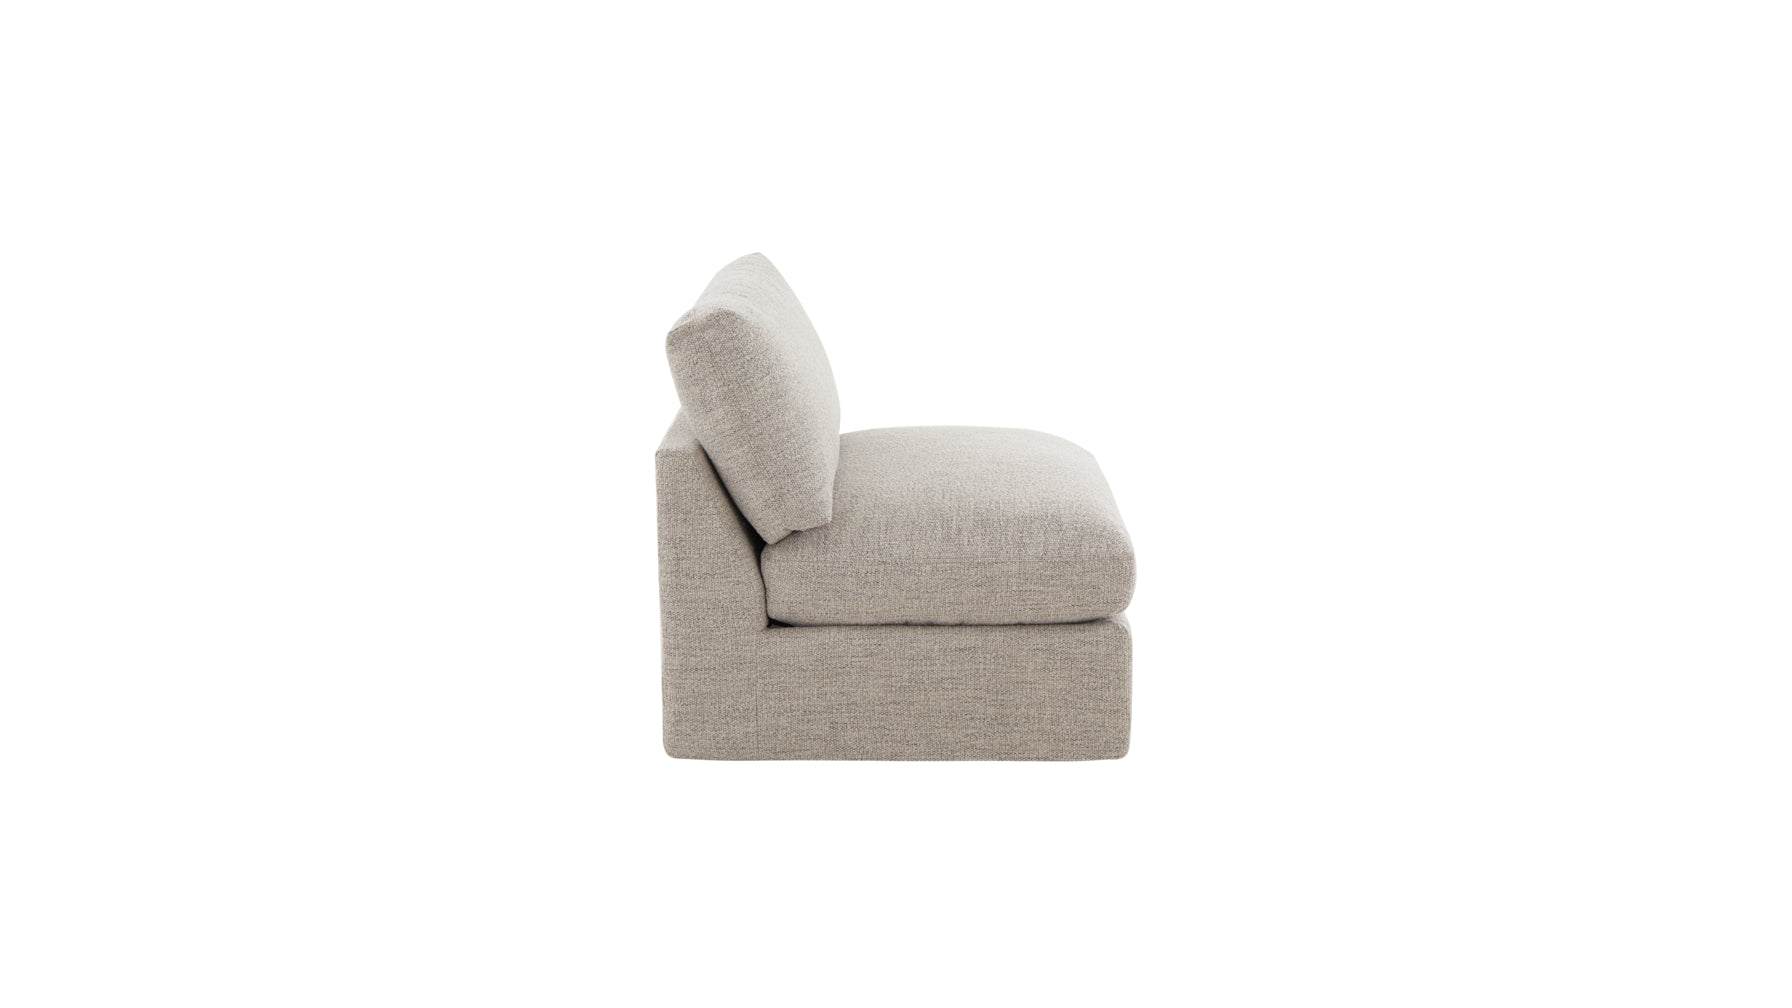 Get Together™ Armless Chair, Standard, Oatmeal - Image 6